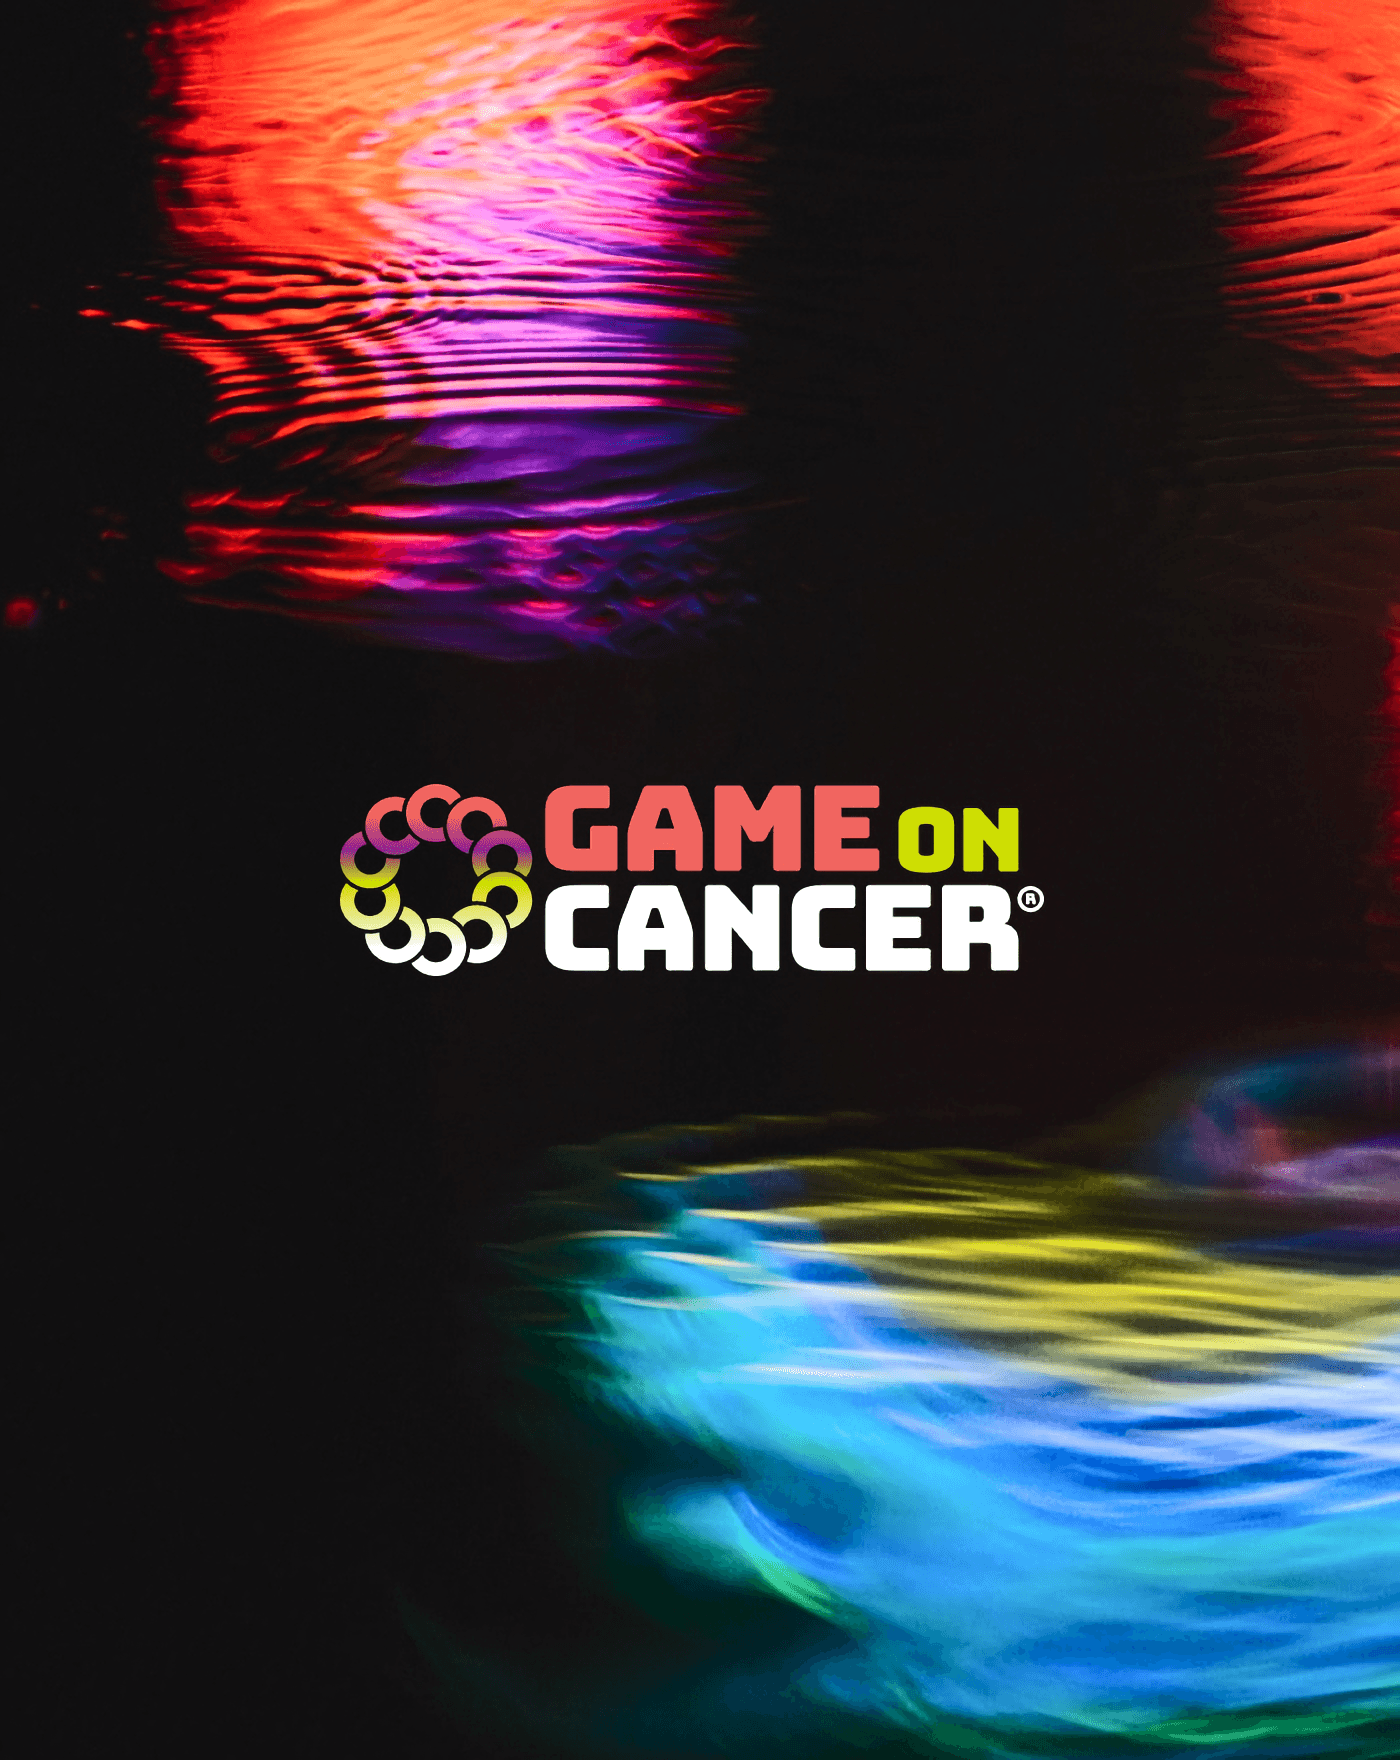 The Game on Cancer logo